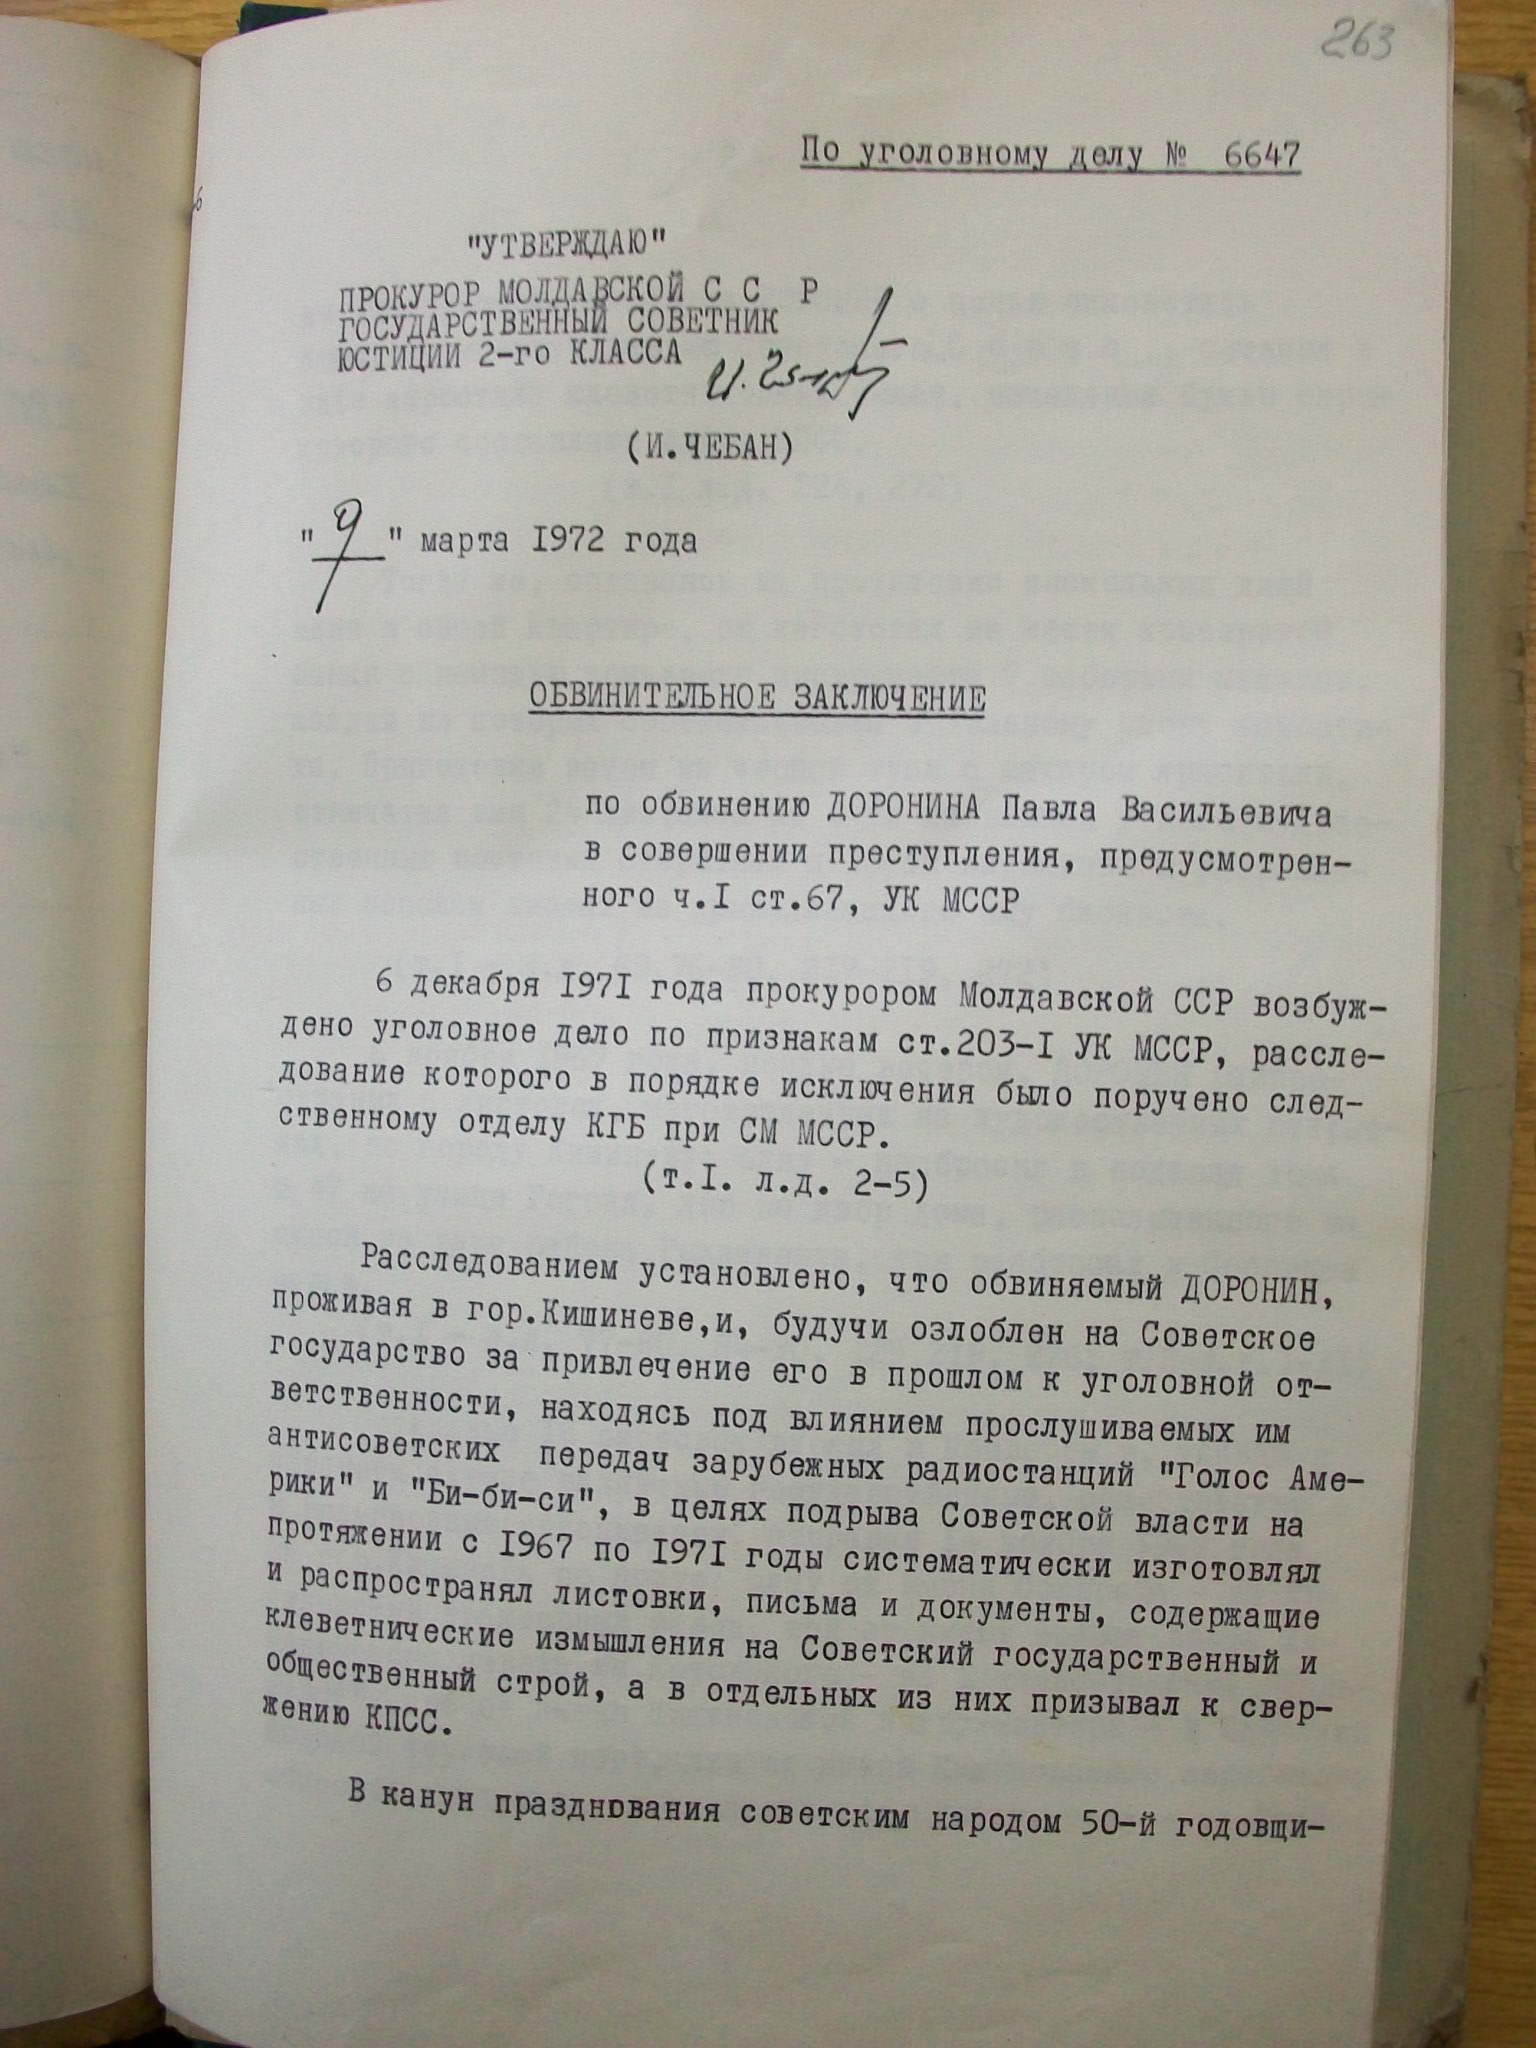 First Page of the Official Accusatory Act concerning the Case of Pavel Doronin